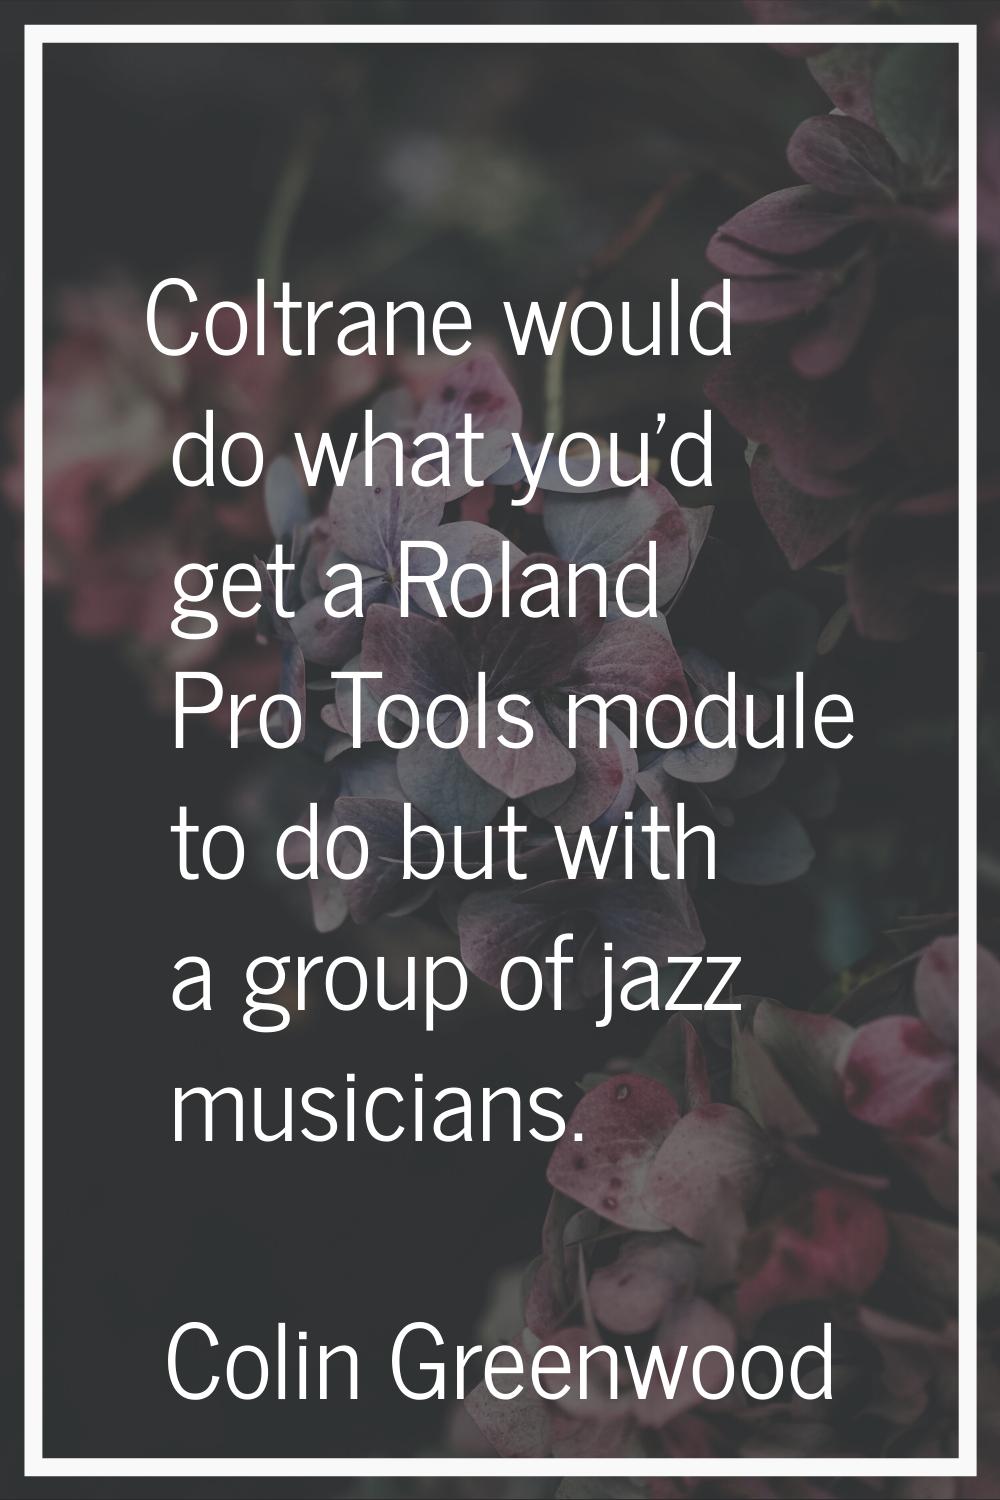 Coltrane would do what you'd get a Roland Pro Tools module to do but with a group of jazz musicians